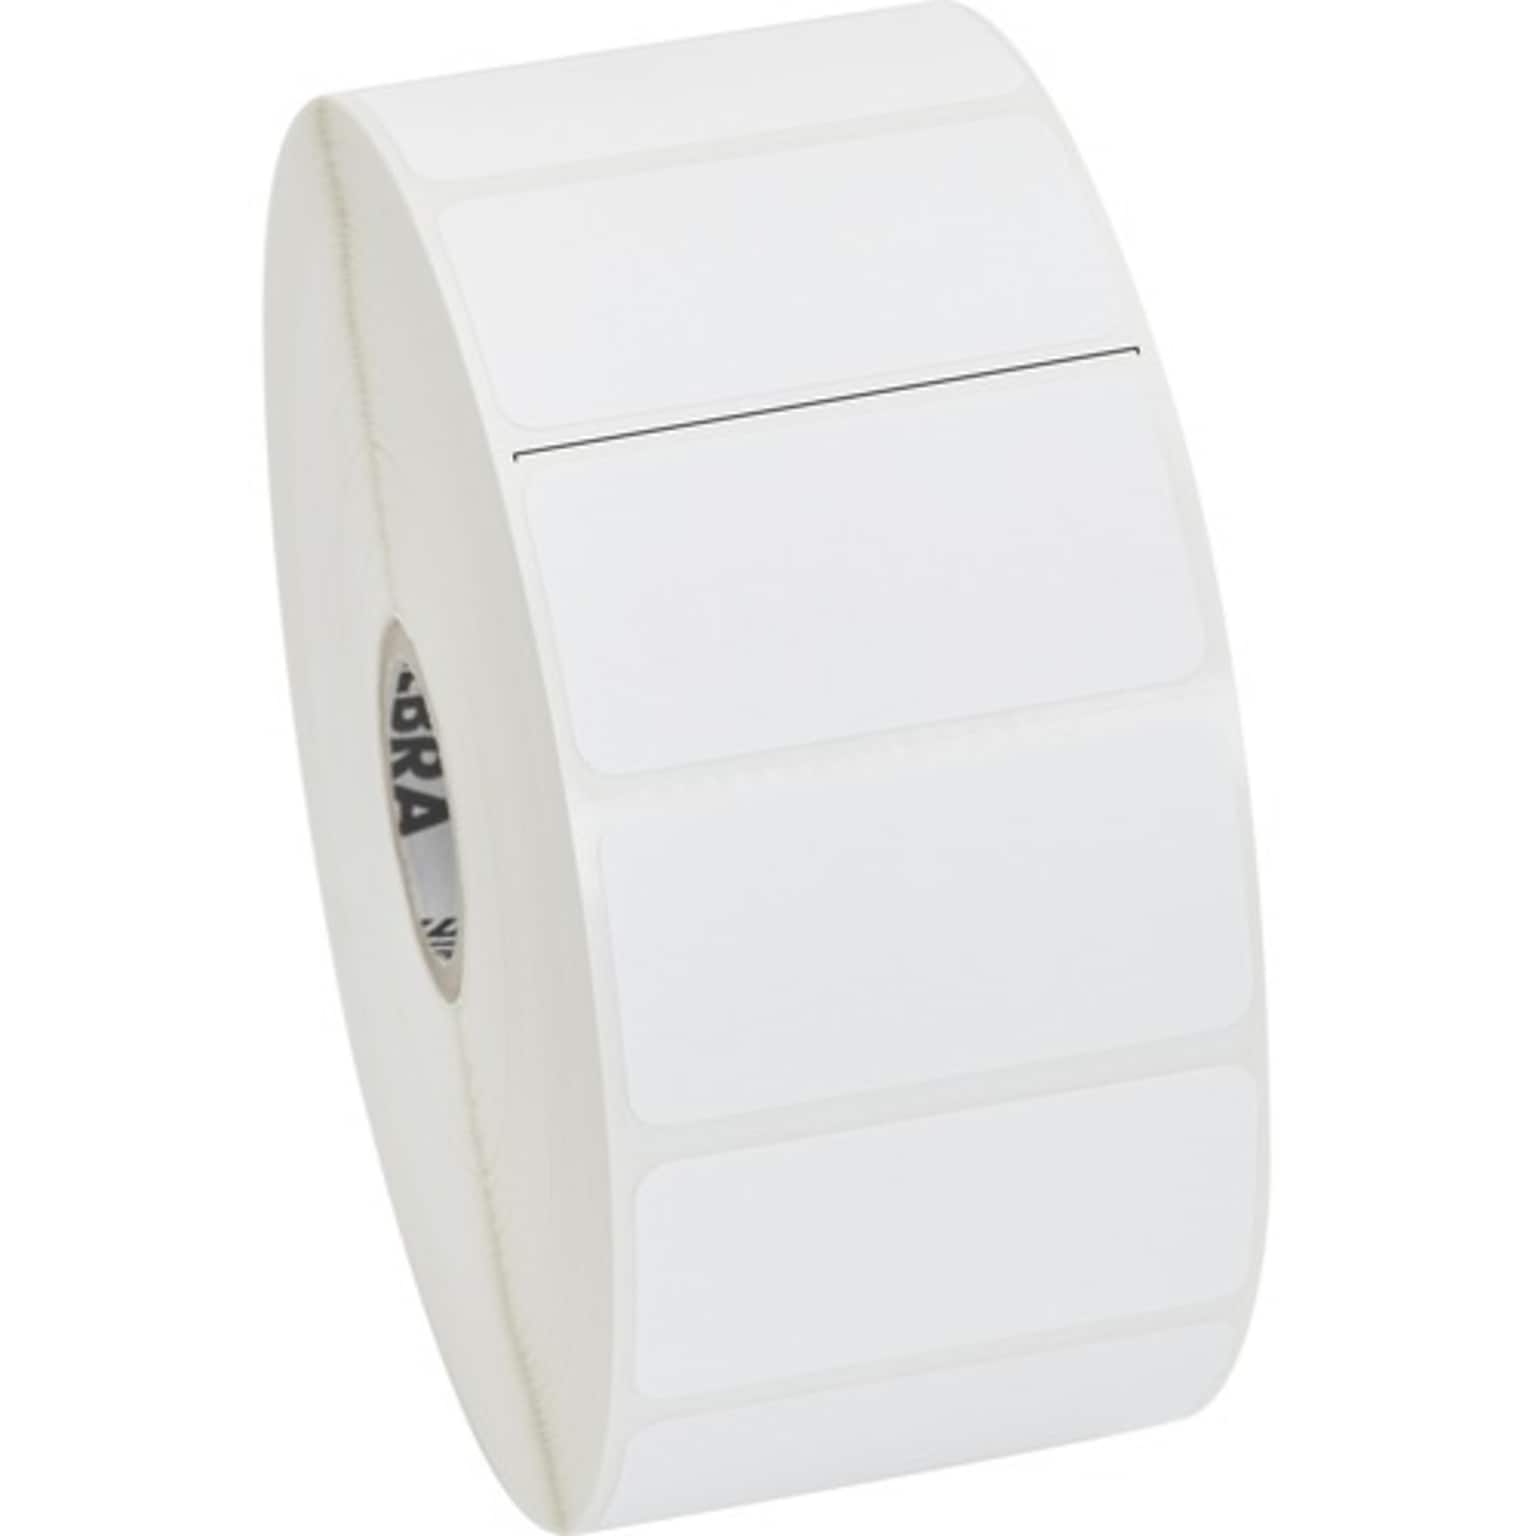 Zebra Z-Perform 2000D Direct Thermal Label, 1 x 2, White, 2,340 Labels/Roll, 6 Rolls/Box (10010028)